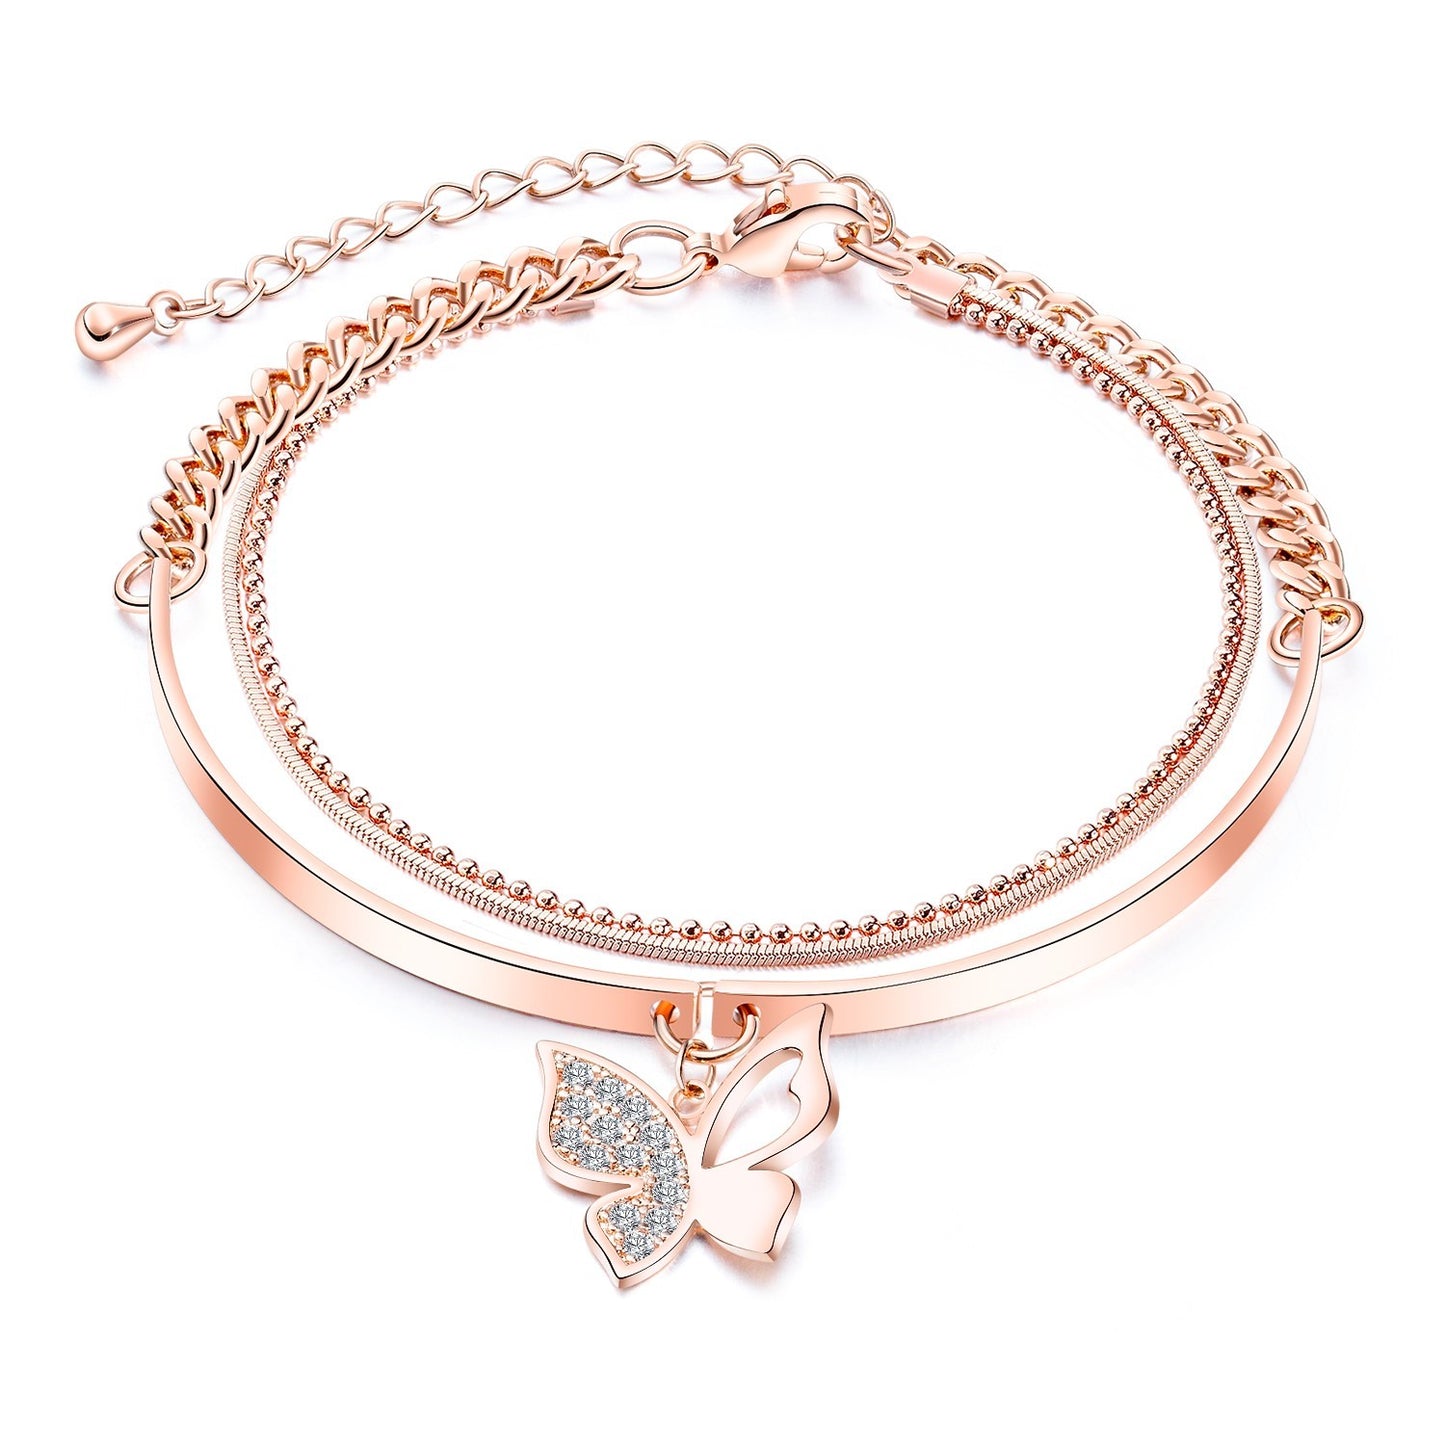 Children's Bracelets:  Surgical Steel Rose Gold IP Stacker Bangle Bracelet with Butterfly Charm